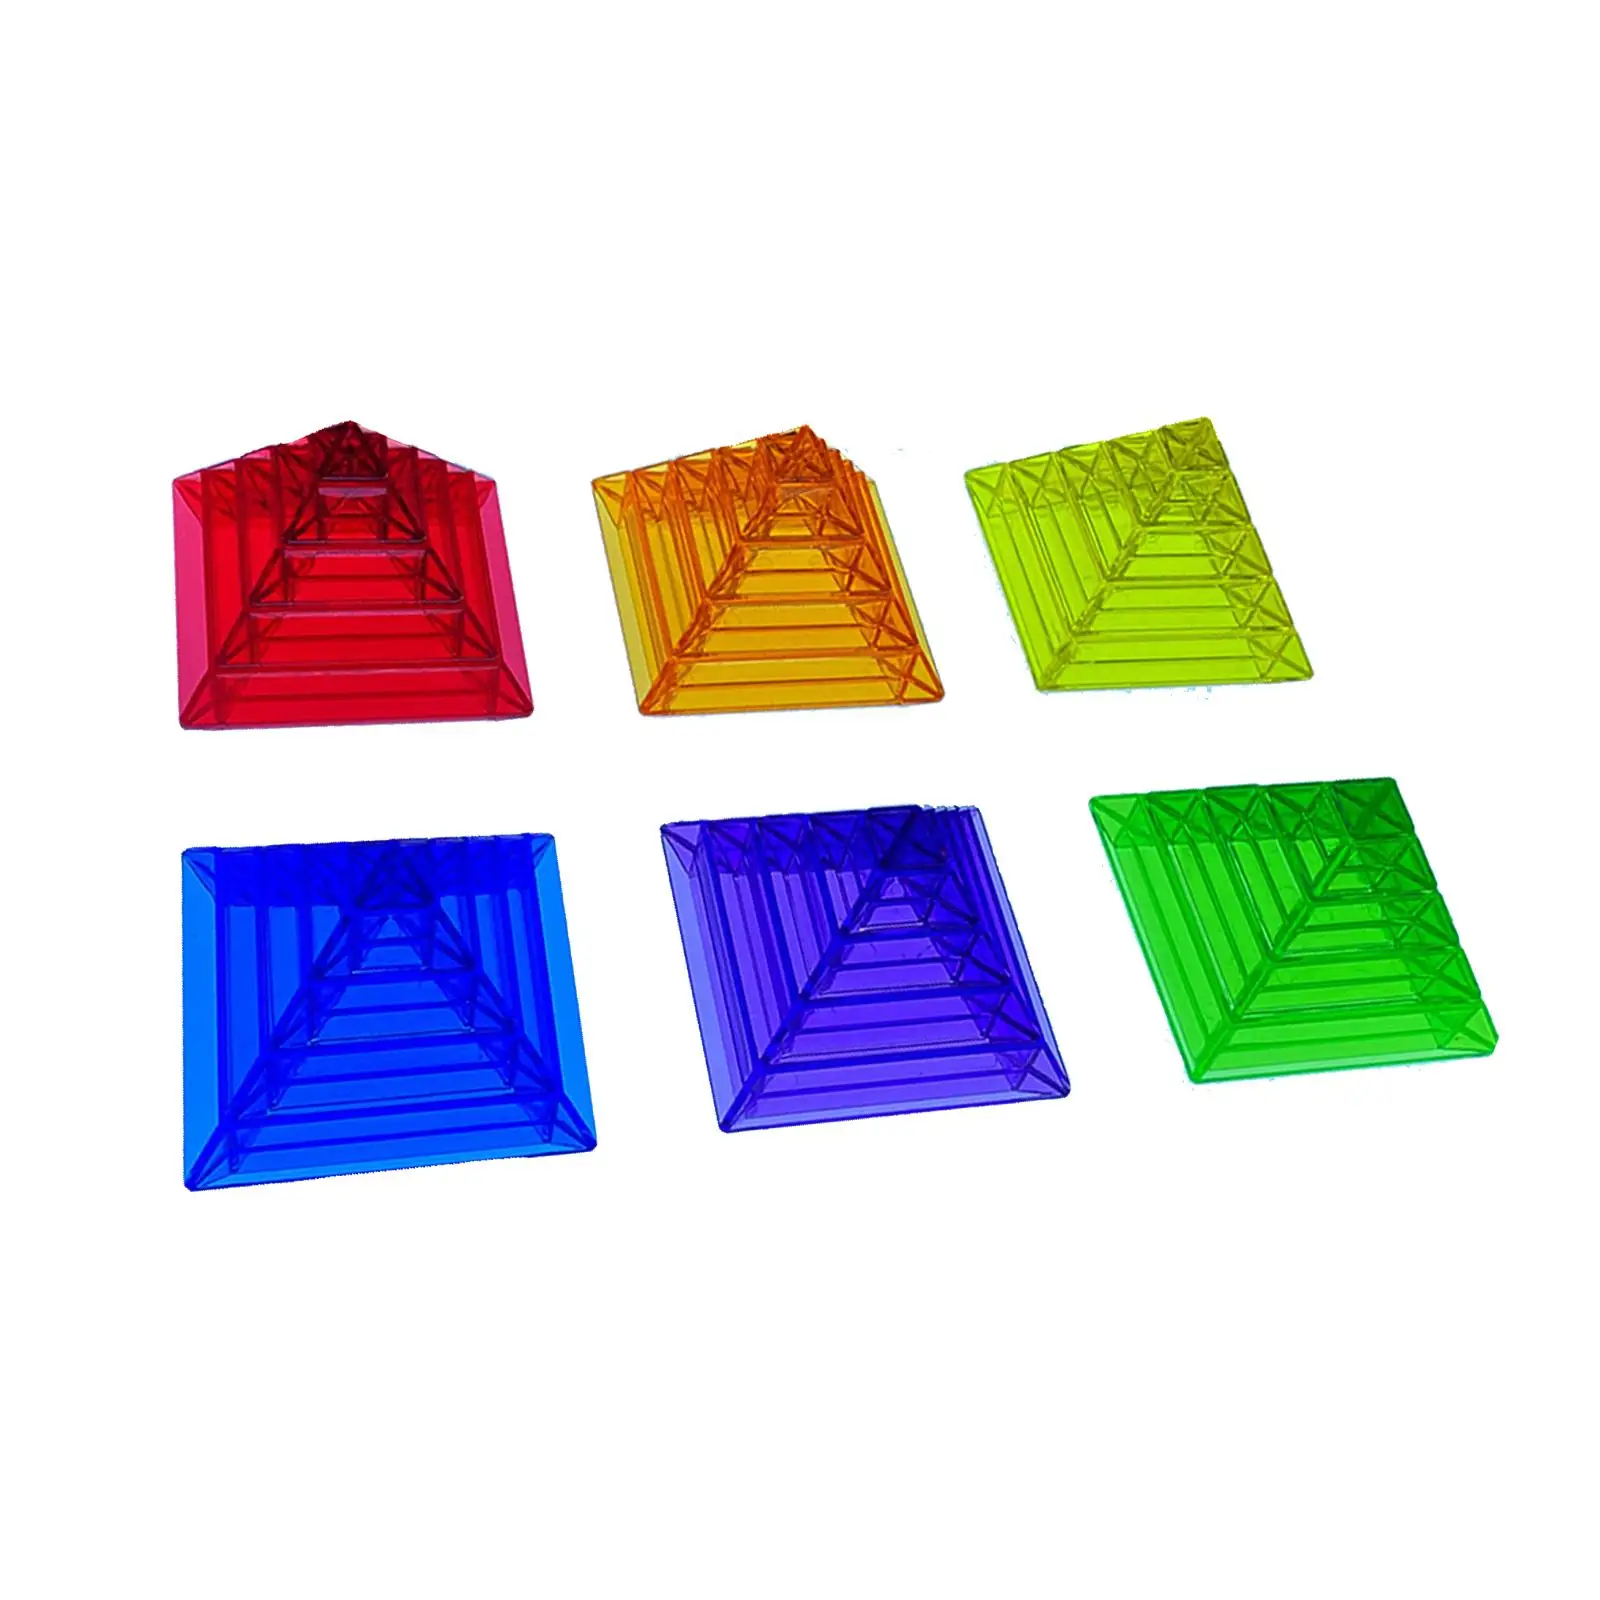 Transparent Pyramid  Toys Building  Coordination Stacking Creative Ability  Thinking Wisdom Pyramids for Kids 